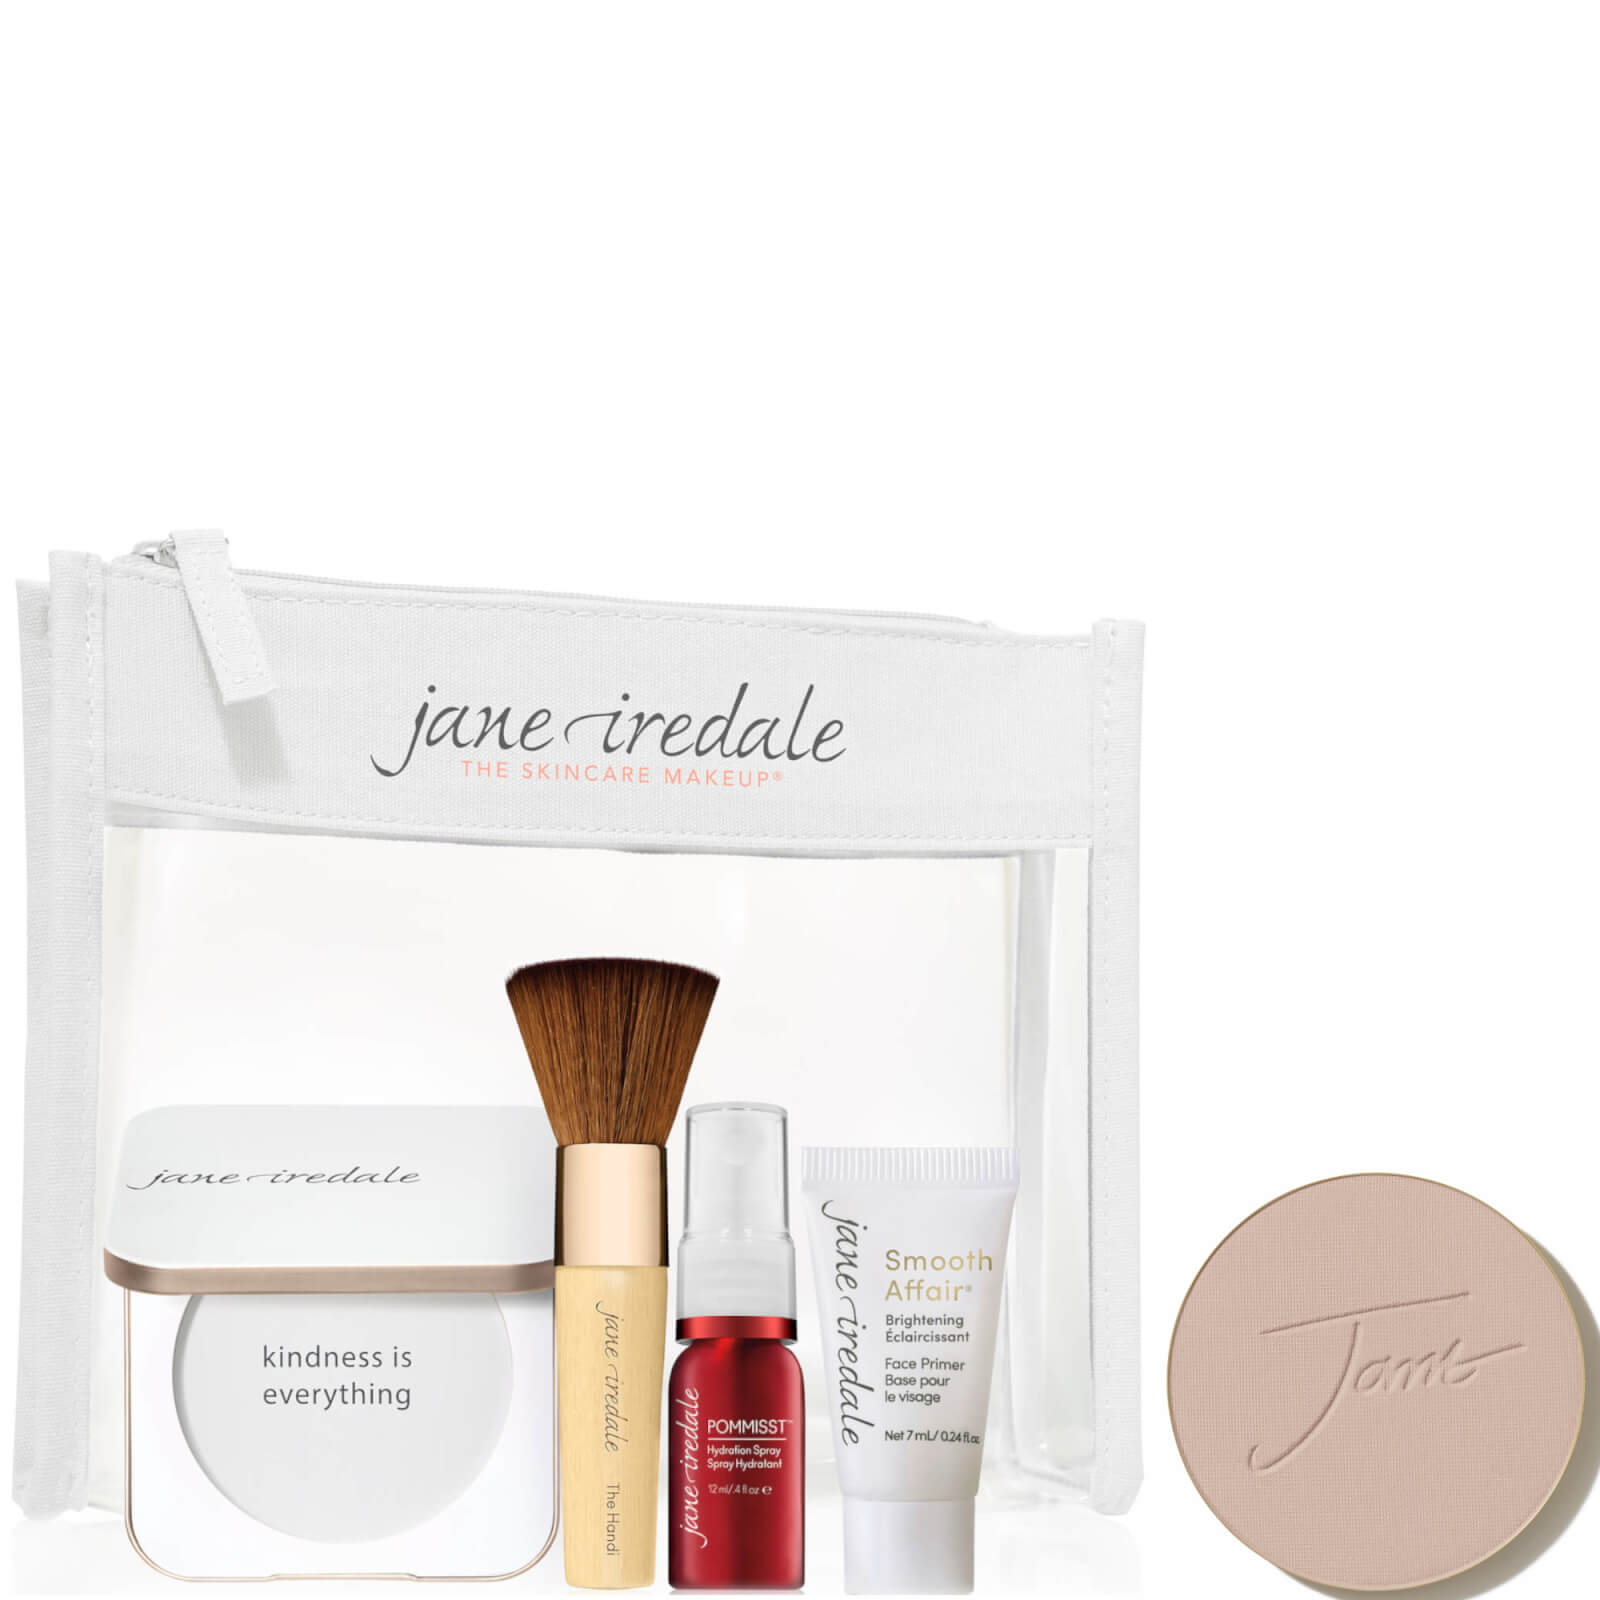 Jane Iredale The Skincare Makeup System Essentials And Purepressed Mineral Foundation Bundle (various Shades) (wo In Suntan